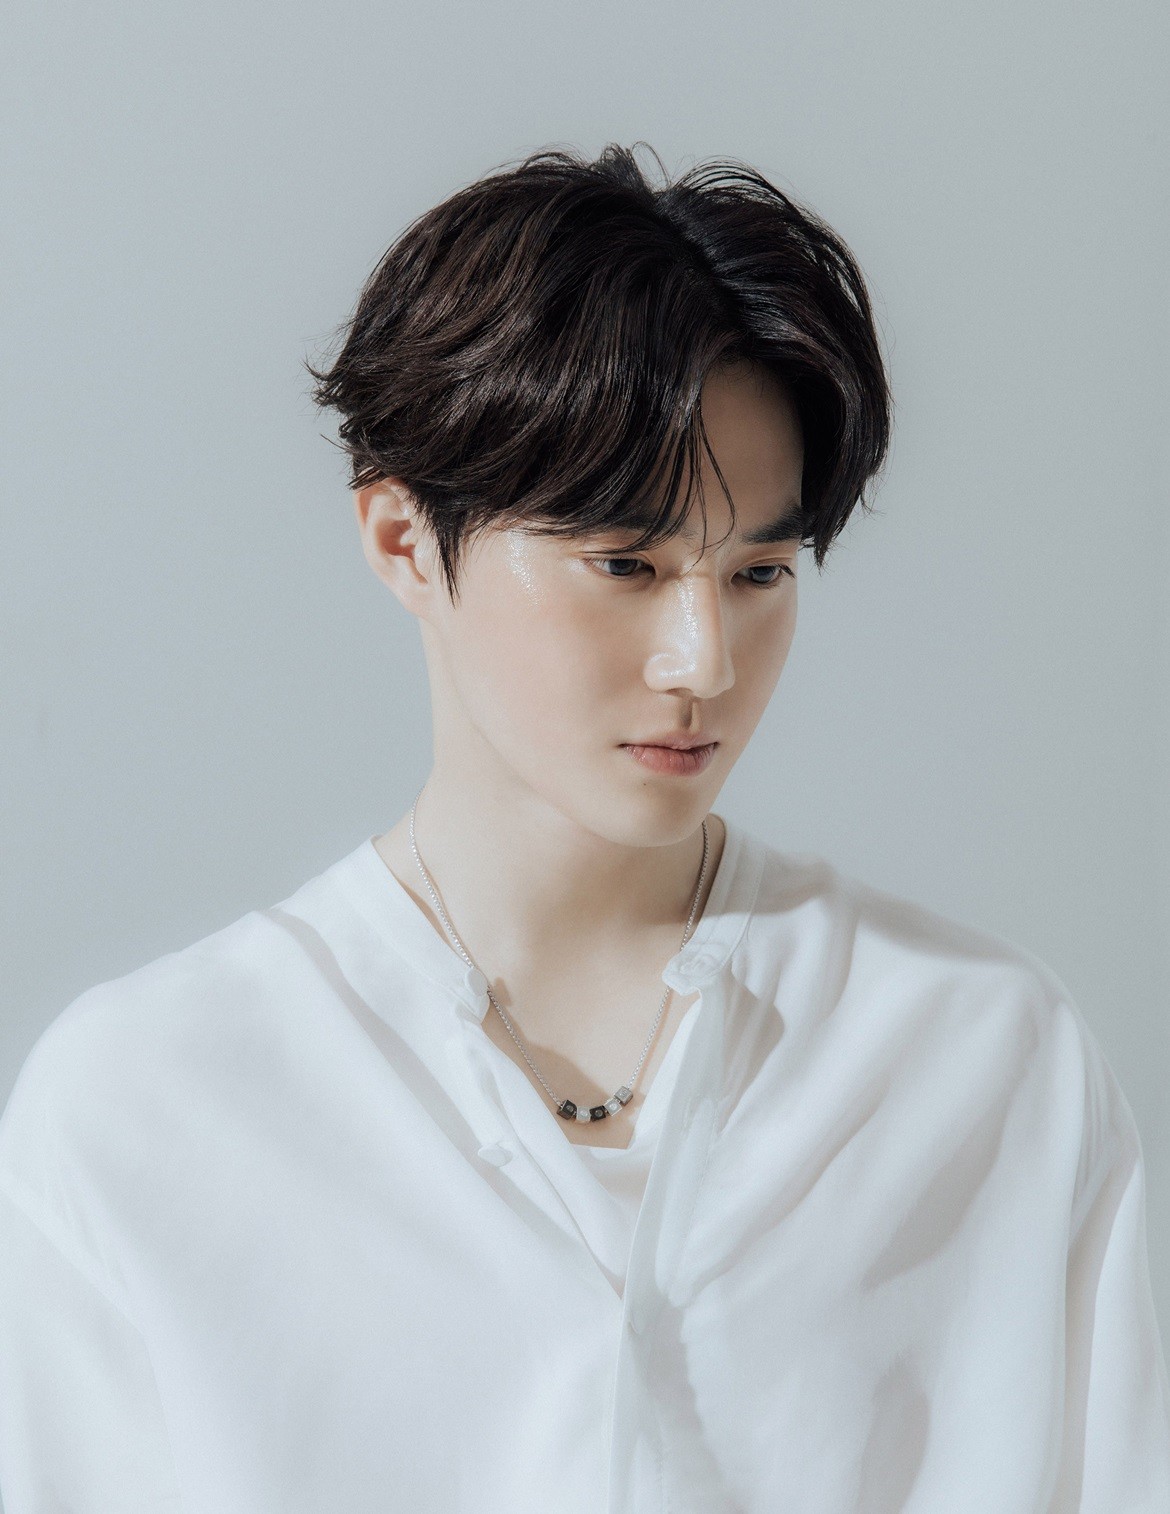 Suho of the group EXO participates in Twitter Inc. The Blue Room Love Live! broadcast to commemorate the first Solo activity.Suho is on Twitter Inc., hosted by Korea on the 26th. The Blue Room Love Live!On this day, Suho will communicate with fans by sharing various stories such as album introduction, future Solo activity plan, and current situation.In addition, a special unboxing corner, which can only be seen on Twitter Inc. The Blue Room, is also available to raise expectations.Suho has a Mini album package consisting of cover, booklet, postcard, general photo card, special photo card, etc. Twitter Inc.The Blue Room Love Live! will be the first to be released and related episodes will be released.The winner of the # Thousand First Suho Picture Contest, which was held on the EXO official Twitter Inc. account to commemorate the release of the Mini album, is also on Twitter Inc.The Blue Room Love Live! is introduced via live coverage.Suho will release its first Mini album Self-Portrait on the 30th and enter into full-scale activities.